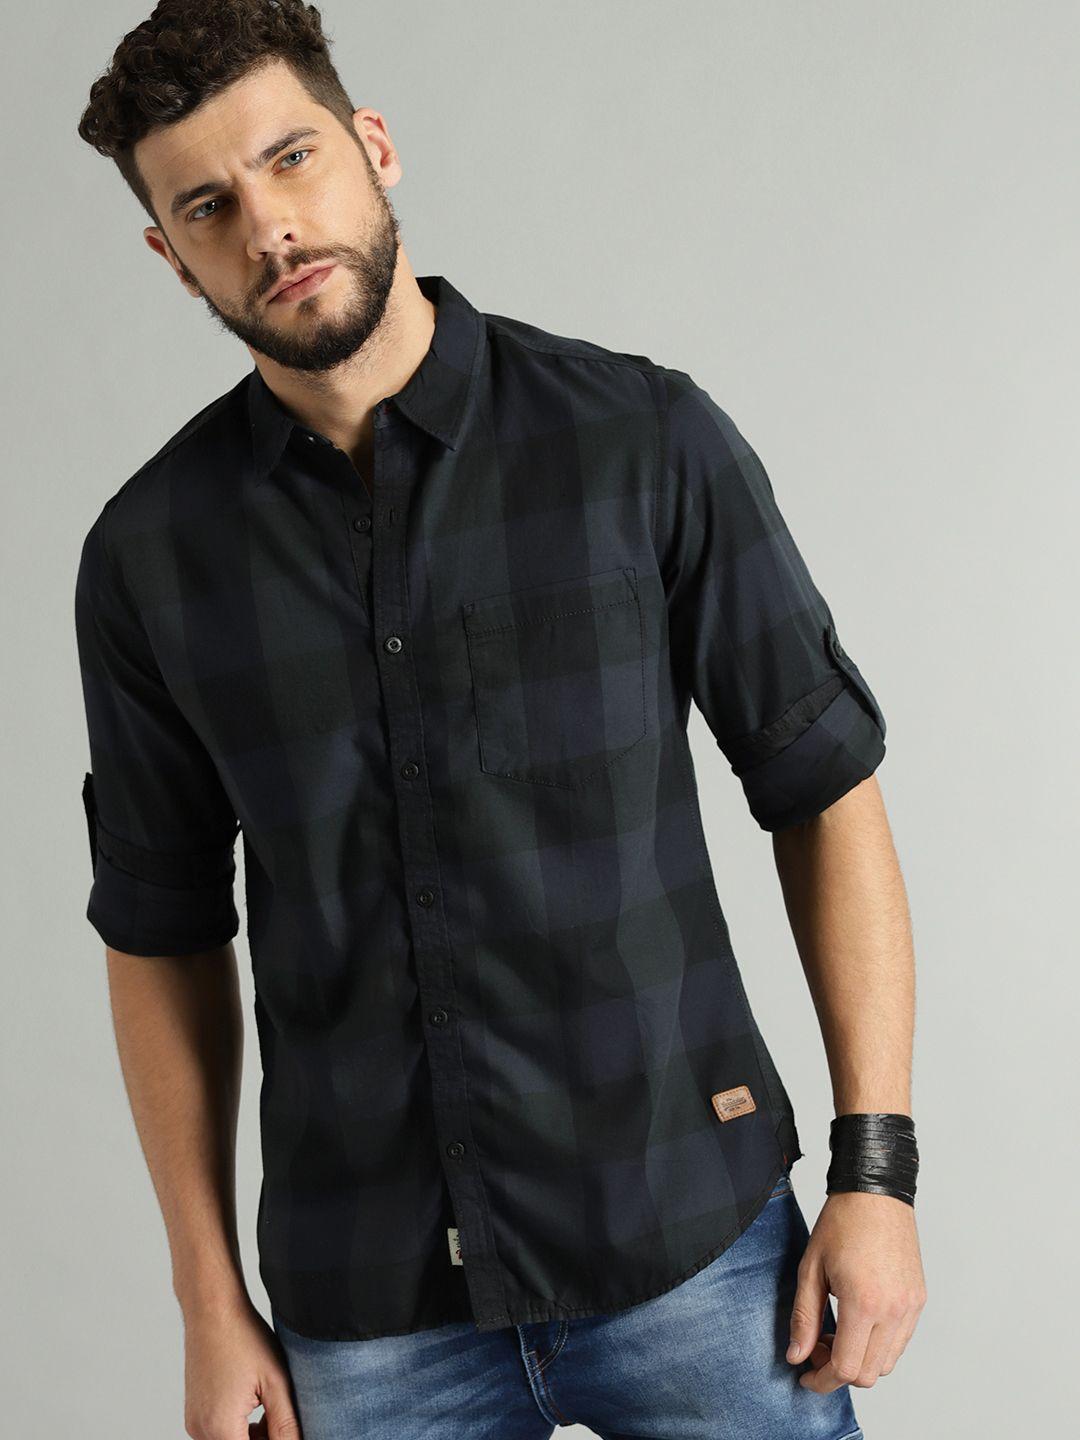 roadster-time-travlr-men-green-&-black-checked-sustainable-casual-shirt